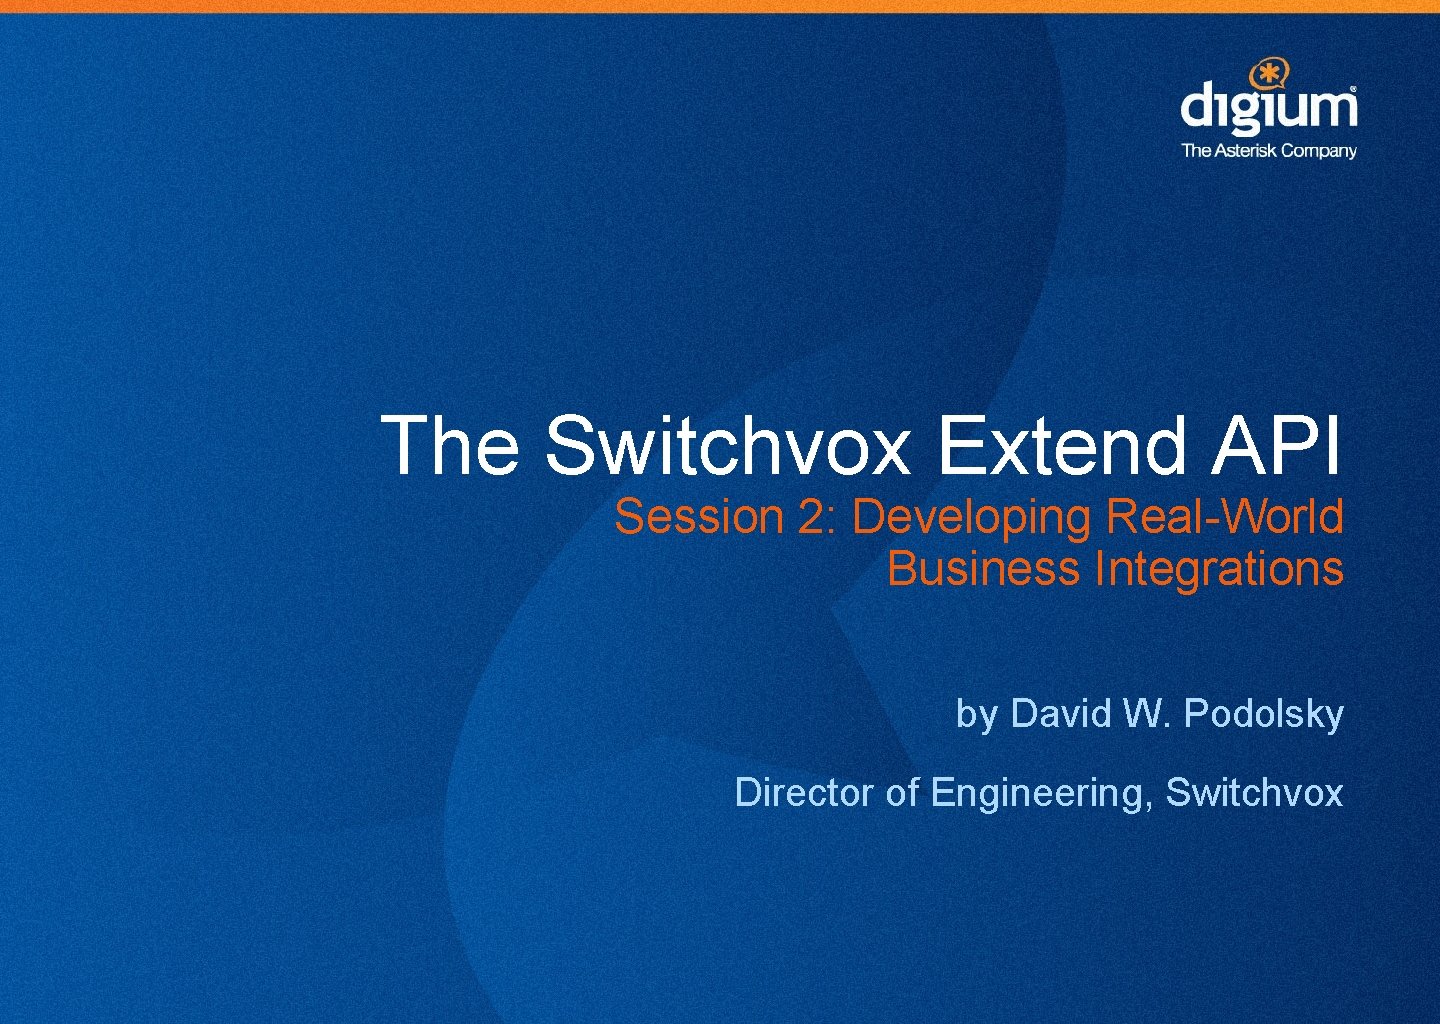 The Switchvox Extend API Session 2: Developing Real-World Business Integrations by David W. Podolsky